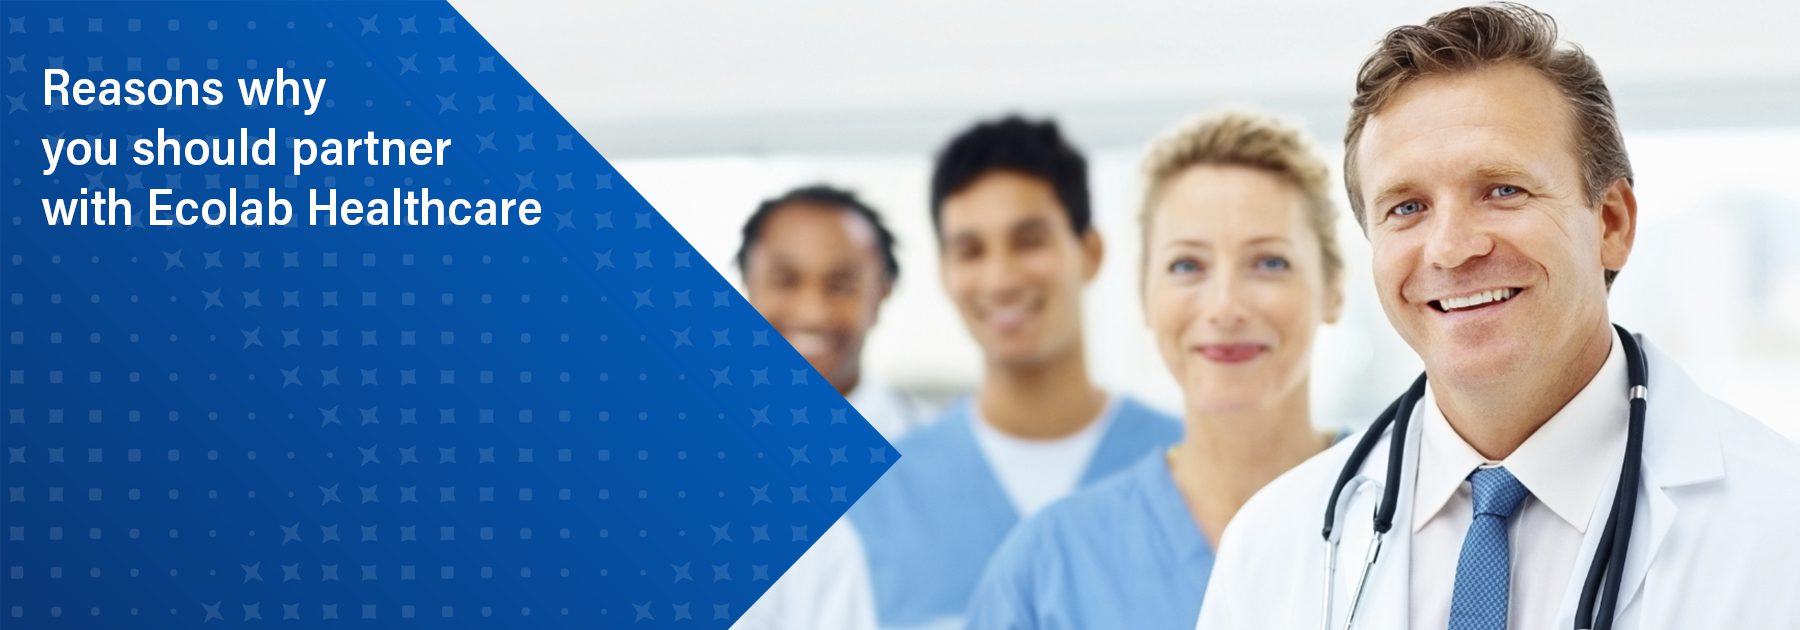 Reasons to choose Ecolab Healthcare